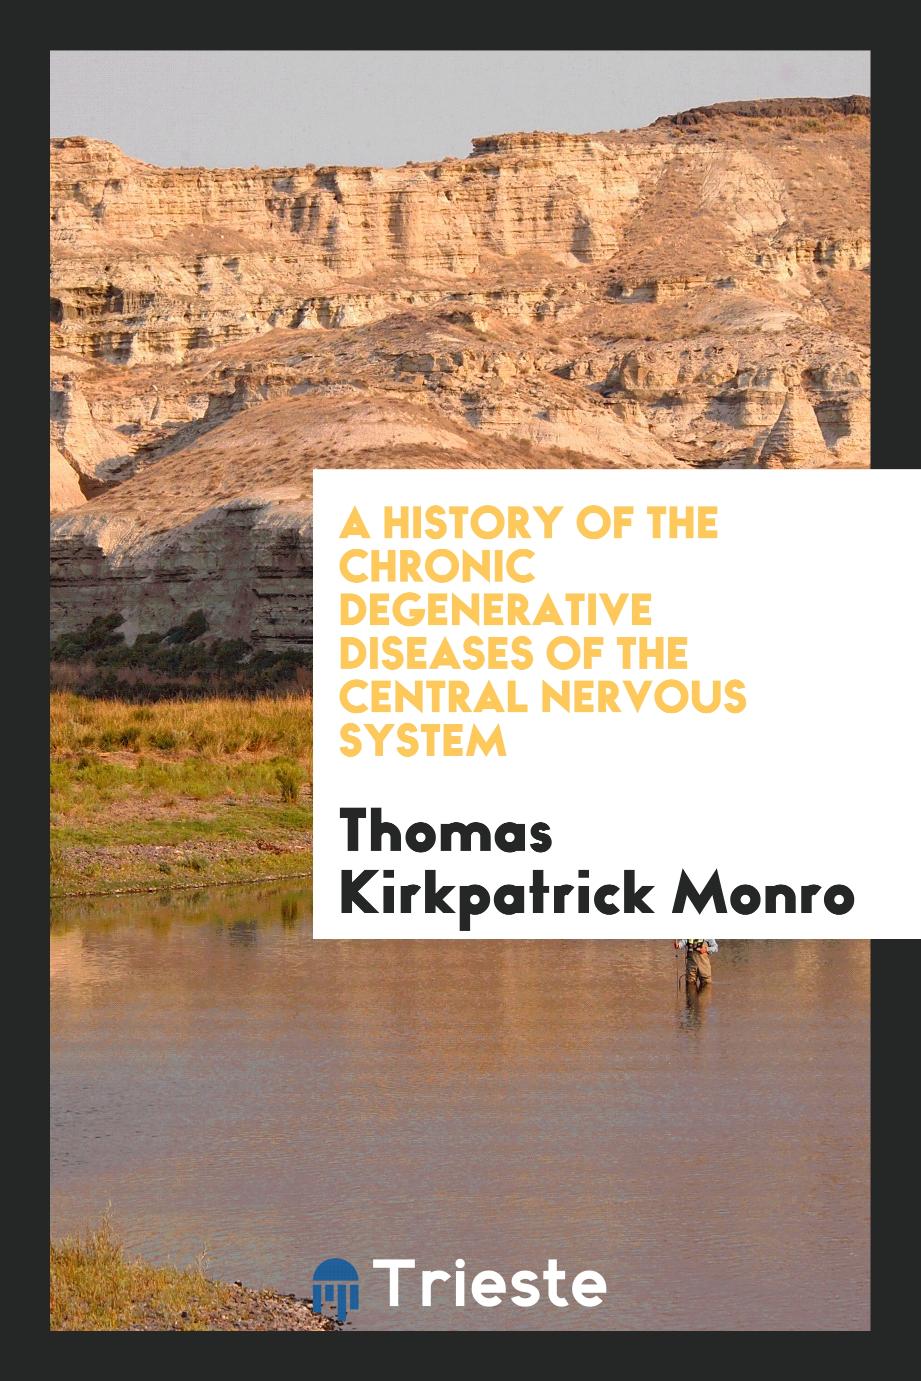 A history of the chronic degenerative diseases of the central nervous system